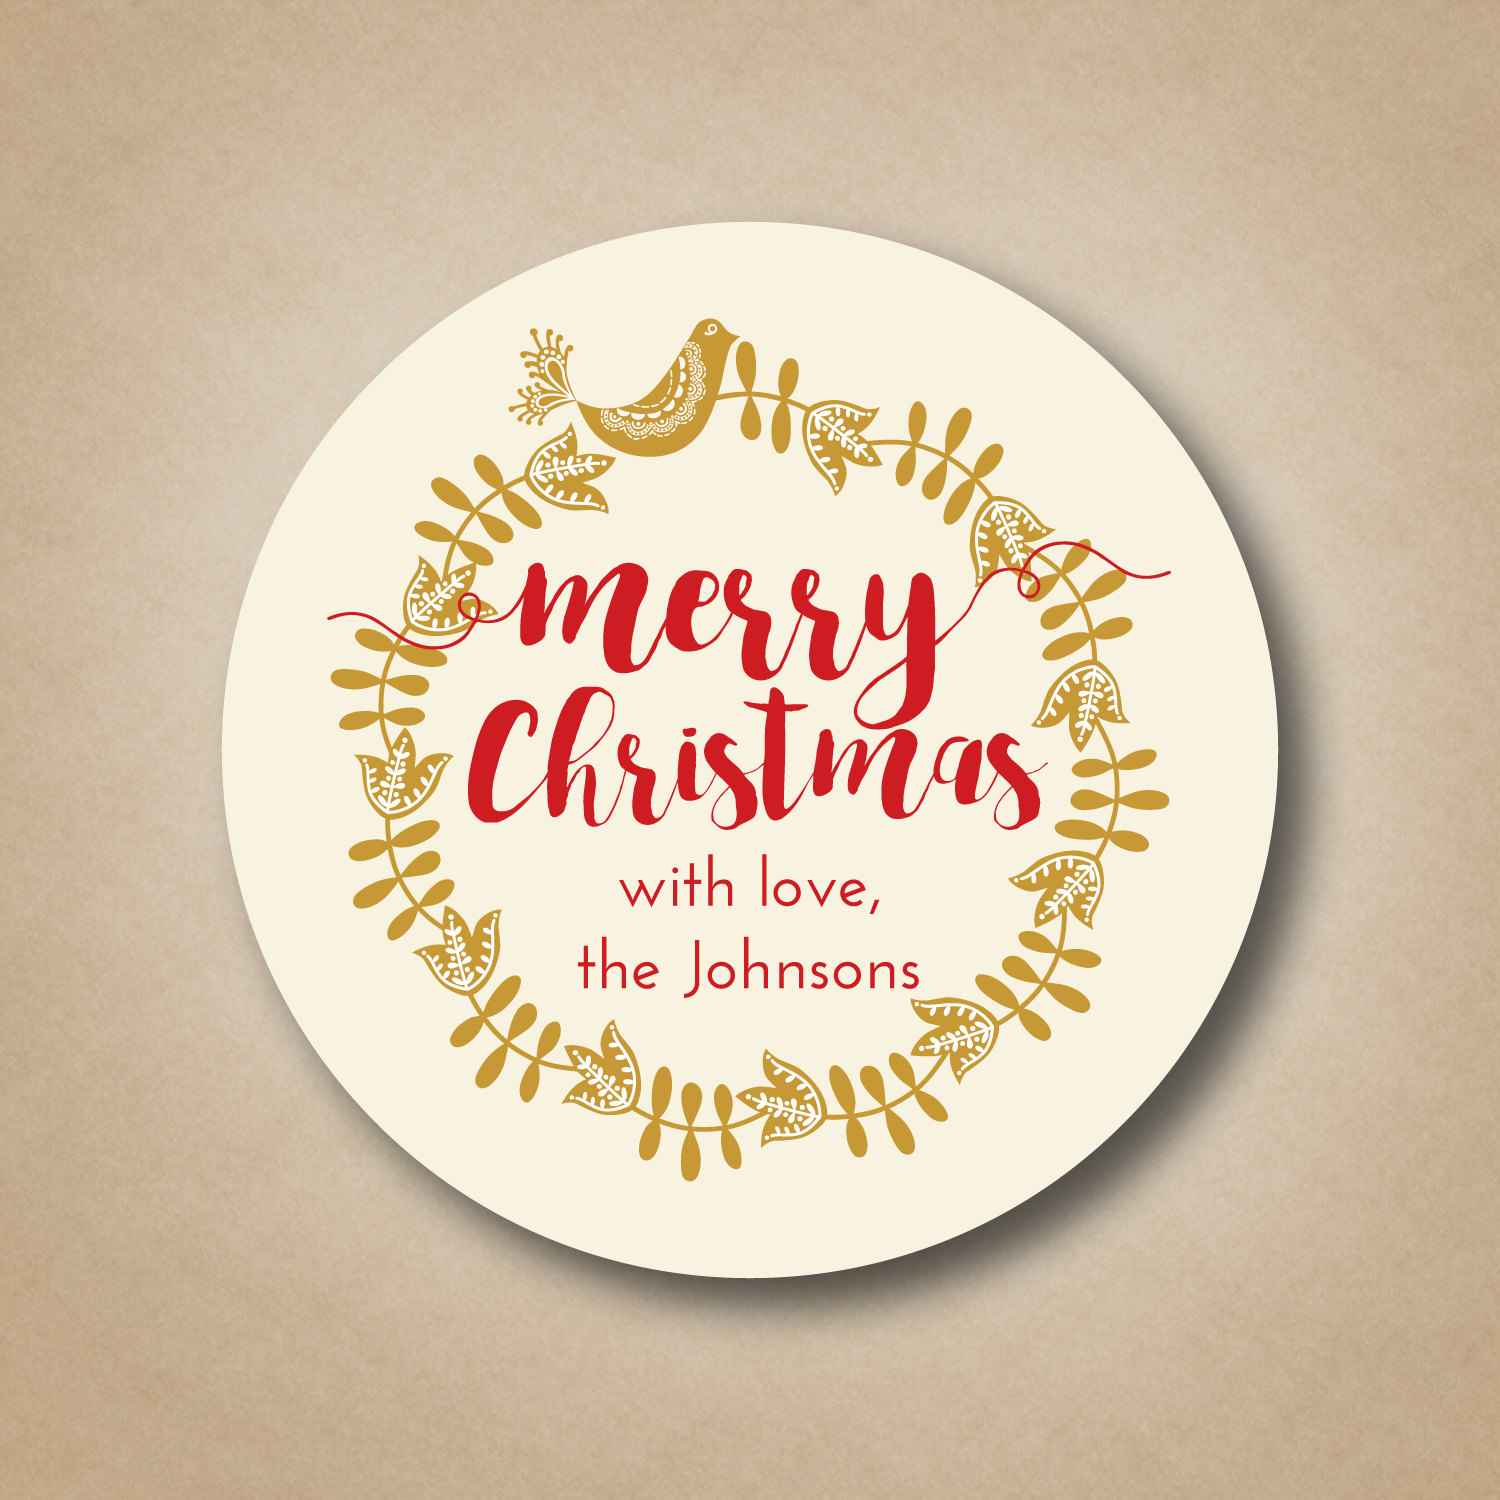 Happy Holidays Sticker Christmas Sticker Personalized Gift Labels Whimsical  Christmas Stickers Cardinal Labels Gift Wrapping Accessories